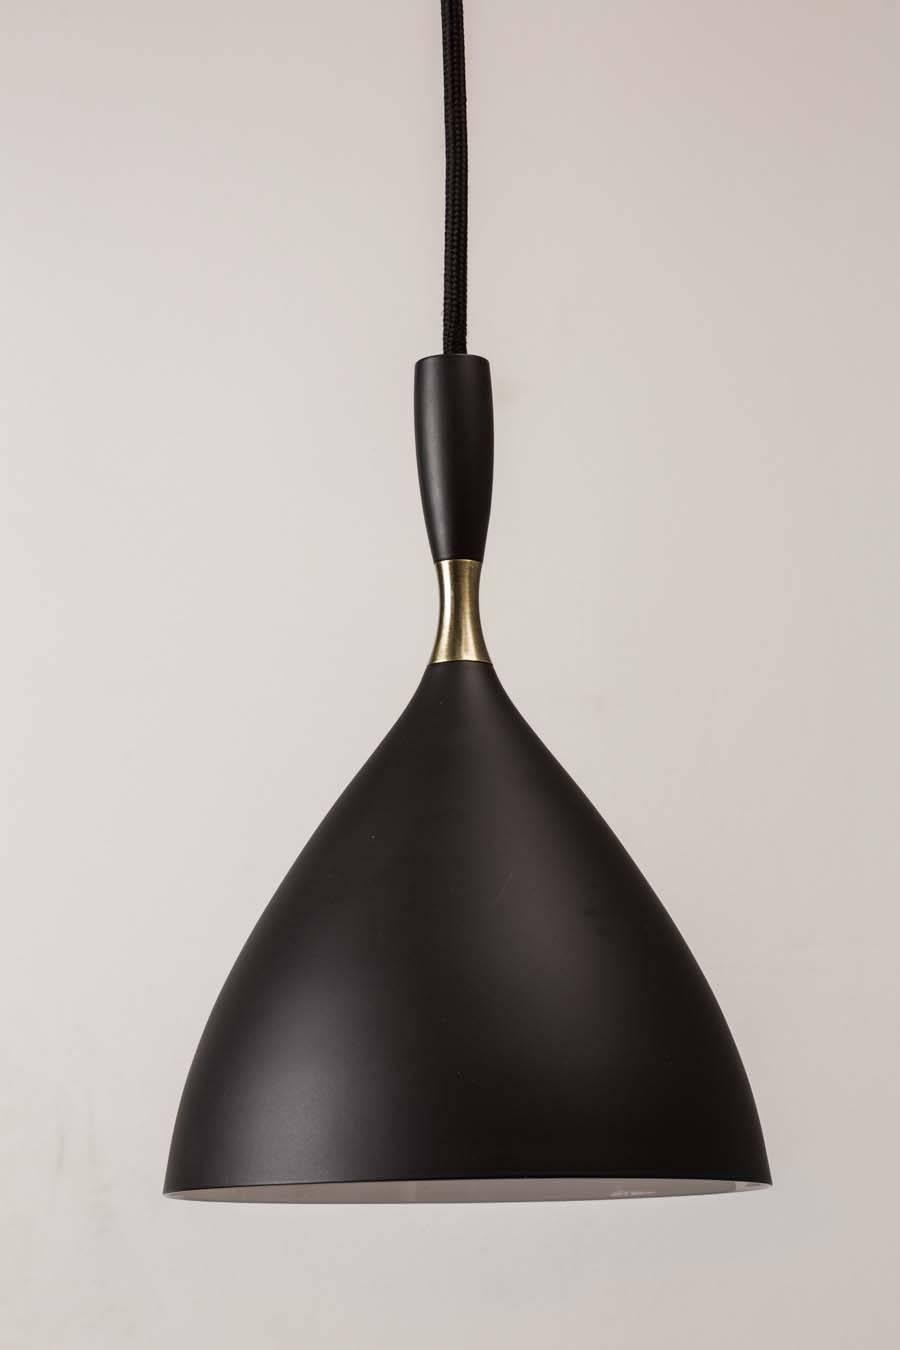 Birger Dahl pendants in the style of Stilnovo. Architectural pendant lights designed circa 1954 and executed in black enameled metal with exquisite brass detail. 36